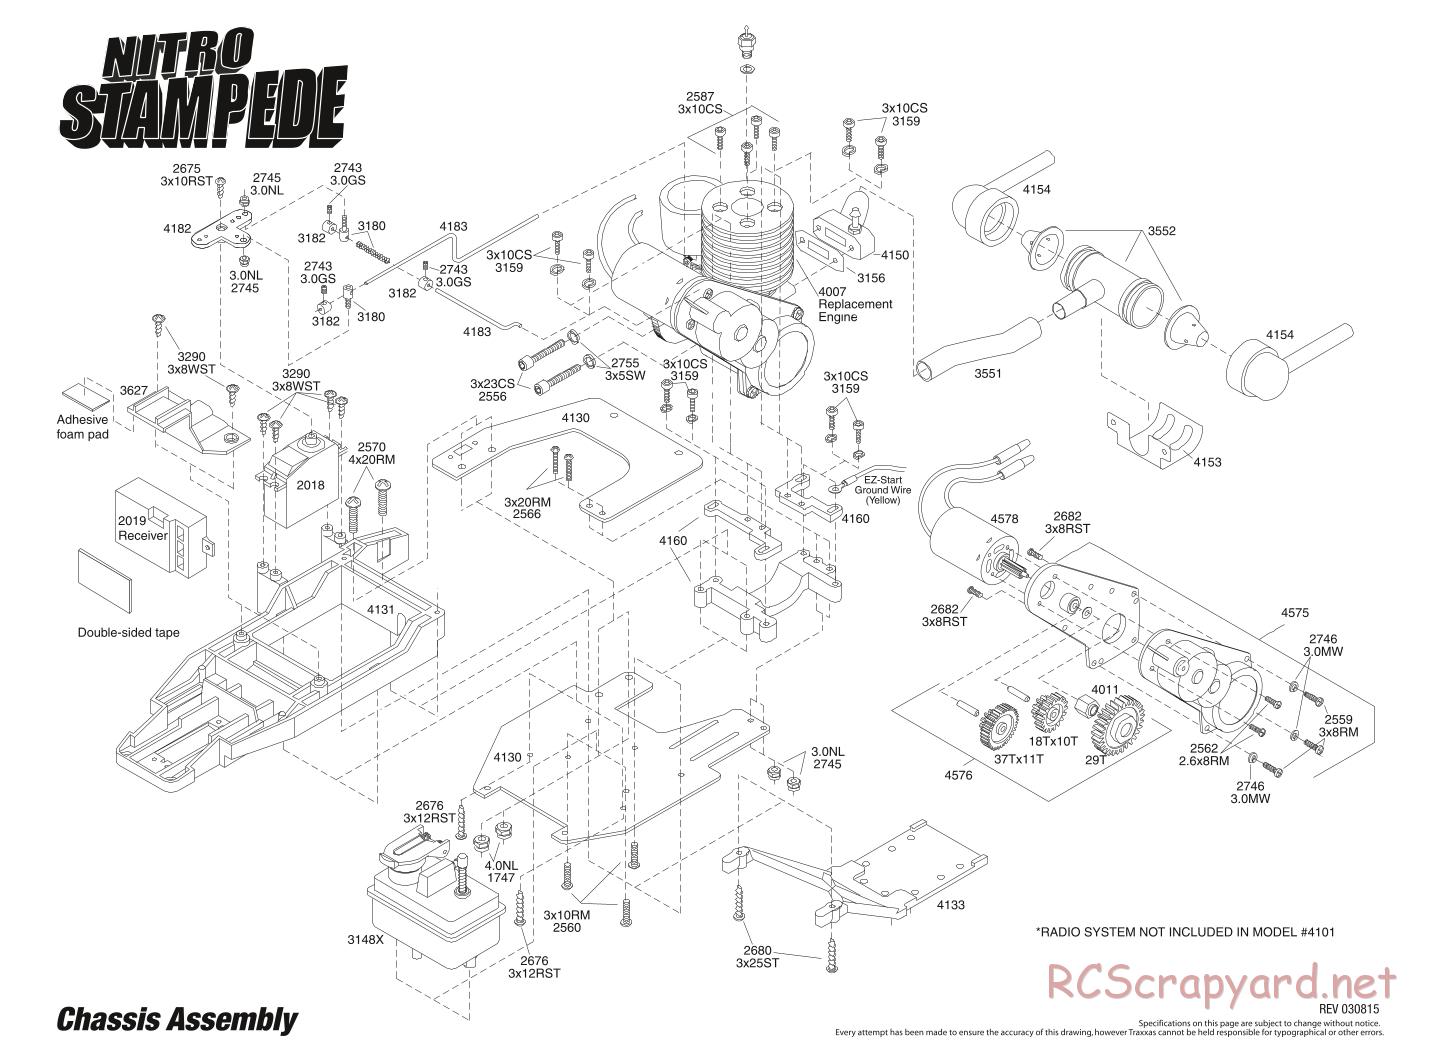 Traxxas - Nitro Stampede - Exploded Views - Page 1